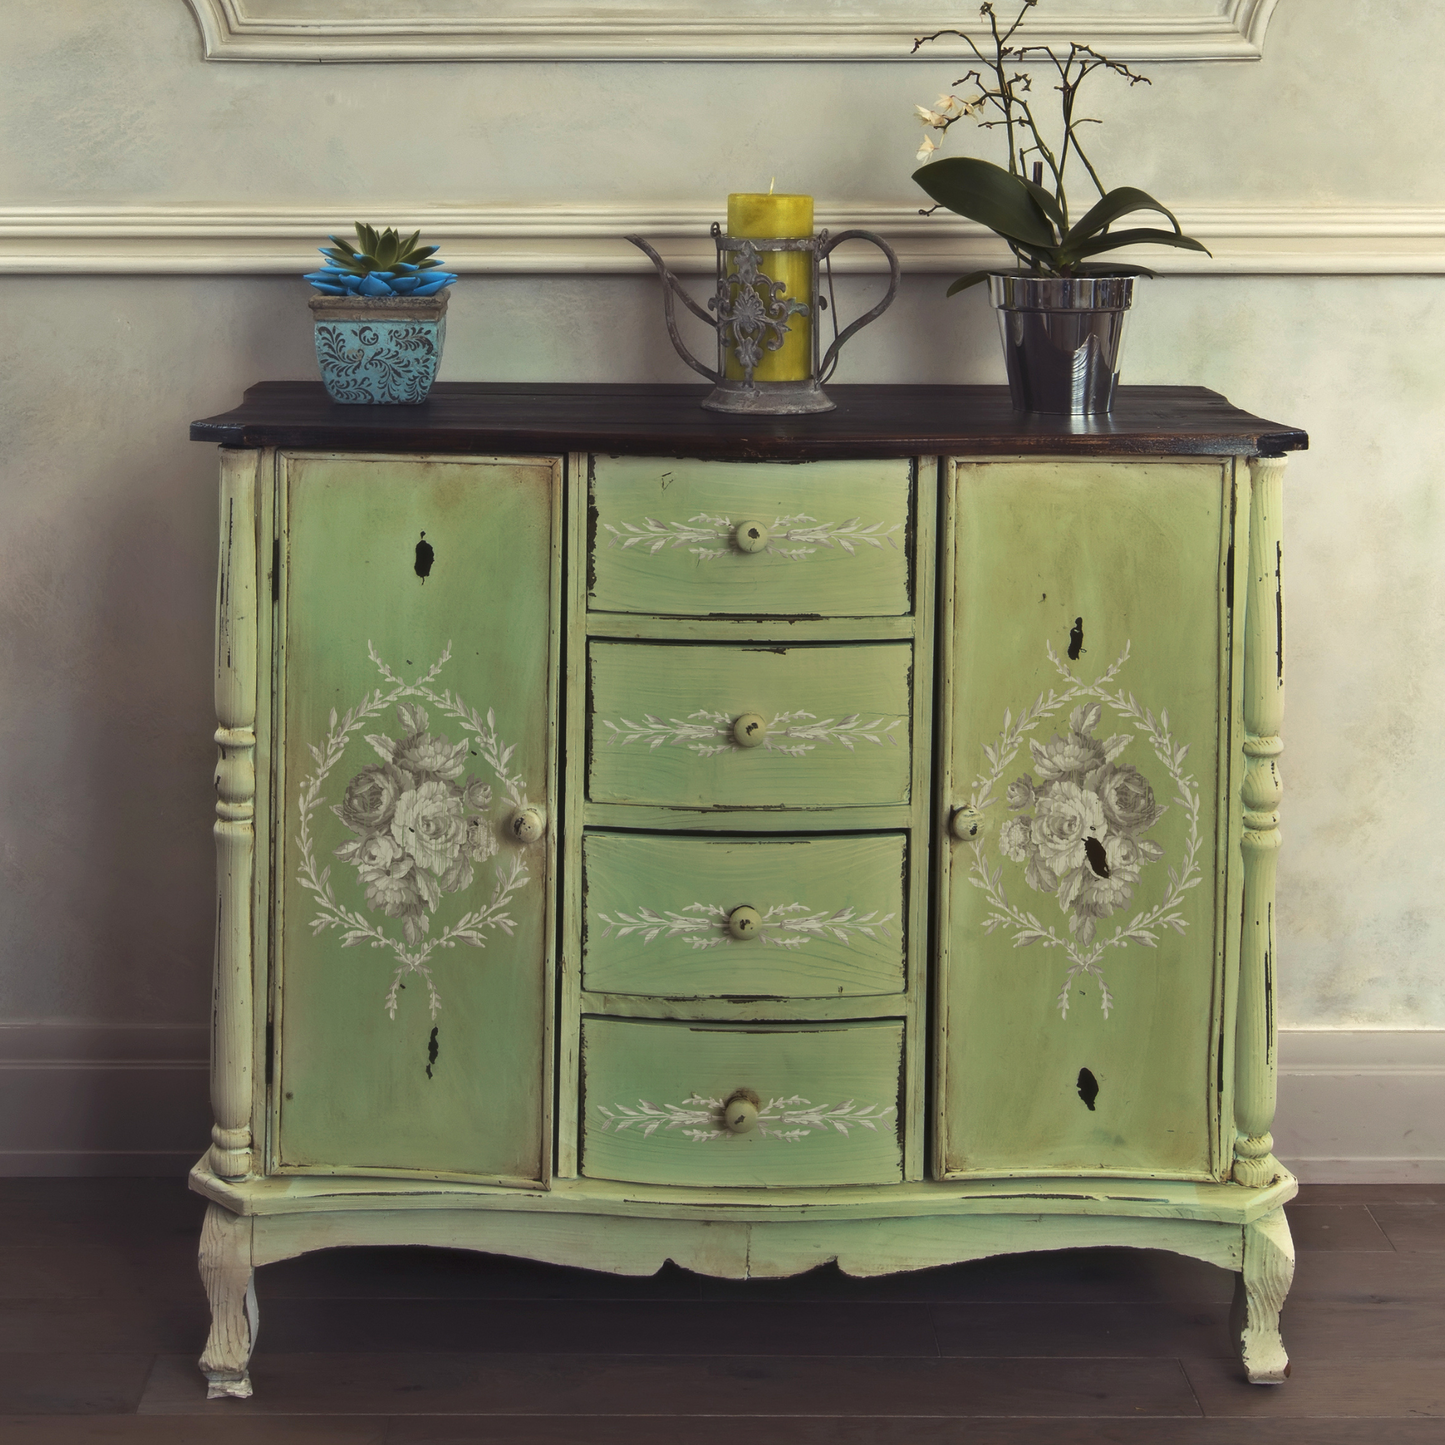 "Trompe L'Oeil Laurel" IOD Paint Inlay Furniture Transfer by Iron Orchid Designs. Example photo #3. Available at Milton's Daughter.